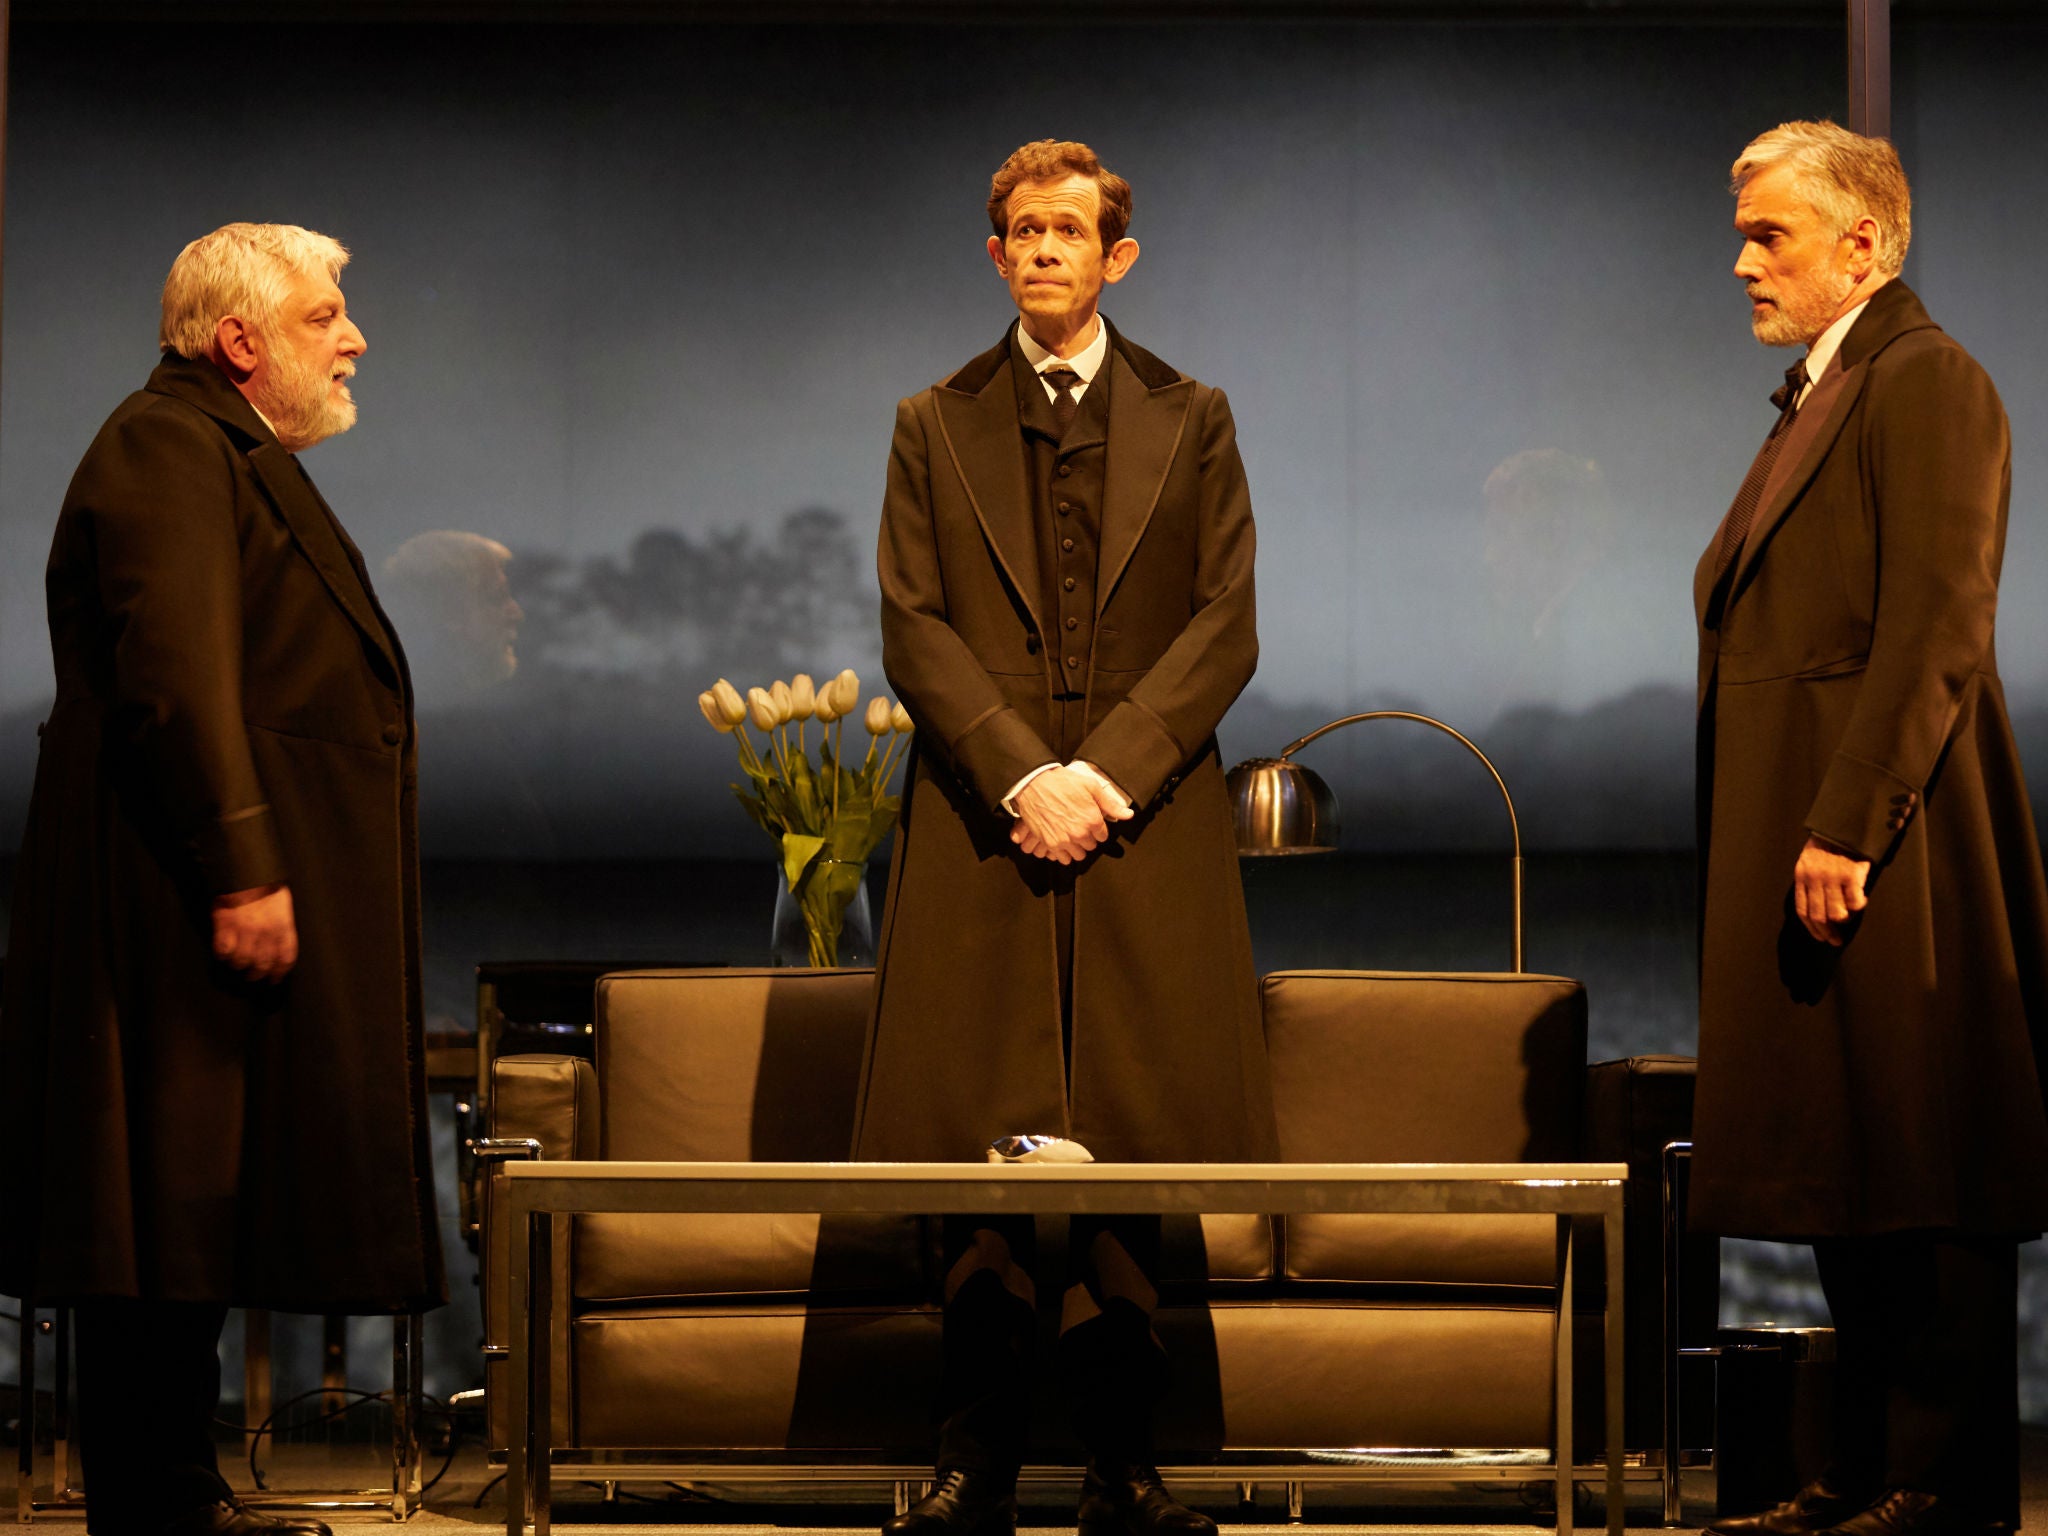 Simon Russell Beale, Adam Godley and Ben Miles magnificently bring to life this 164-year saga